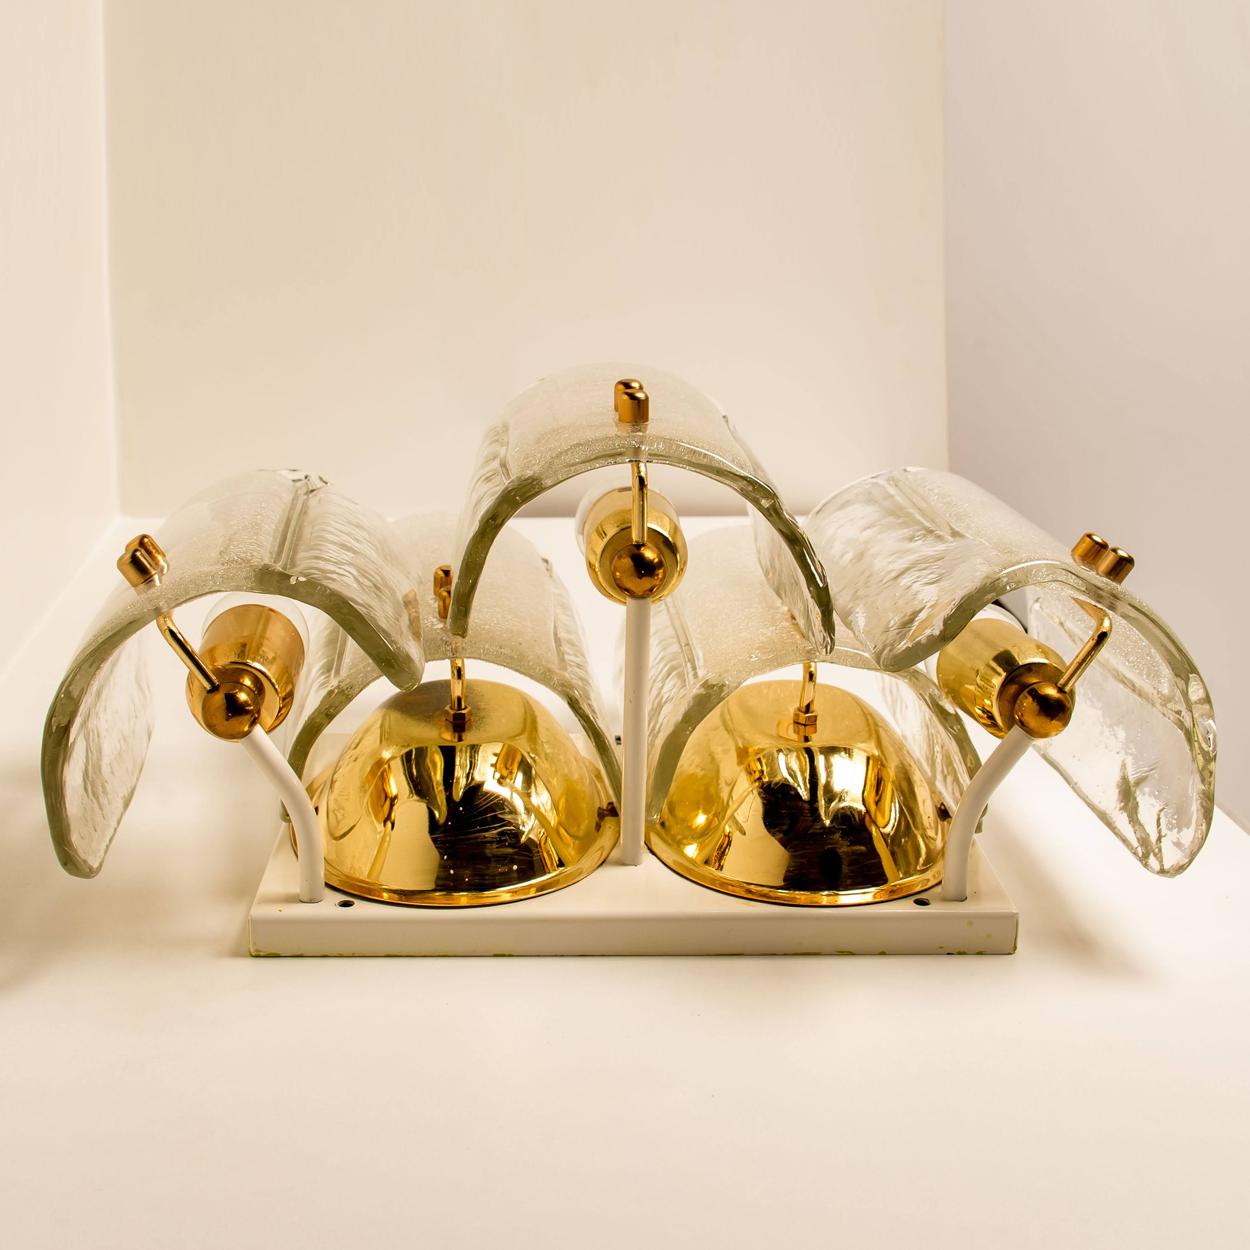 Pair of unique large and elegant glass wall sconces in the style of J.T. Kalmar, manufactured in the 20th century, circa 1970 (late 1960s or early 1970s). A pair of wonderful high-end wall light fixtures with brass detail and 5 thick textured blown